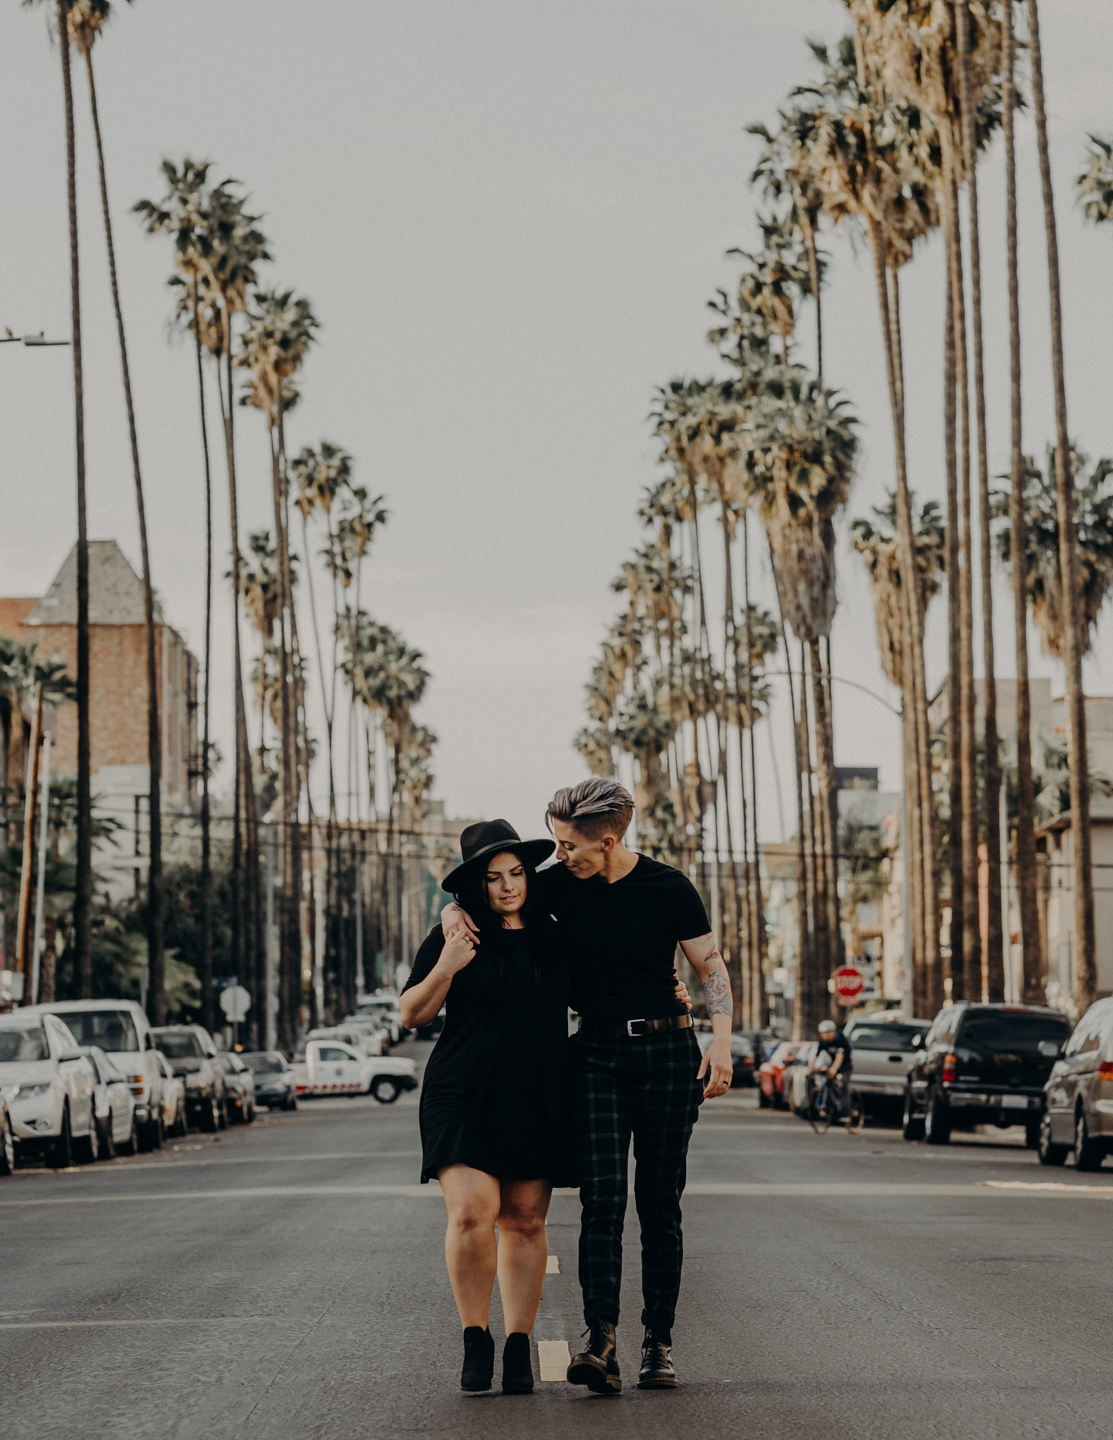 queer wedding photographer in los angeles - lesbian engagement session los angeles - isaiahandtaylor.com-014.jpg